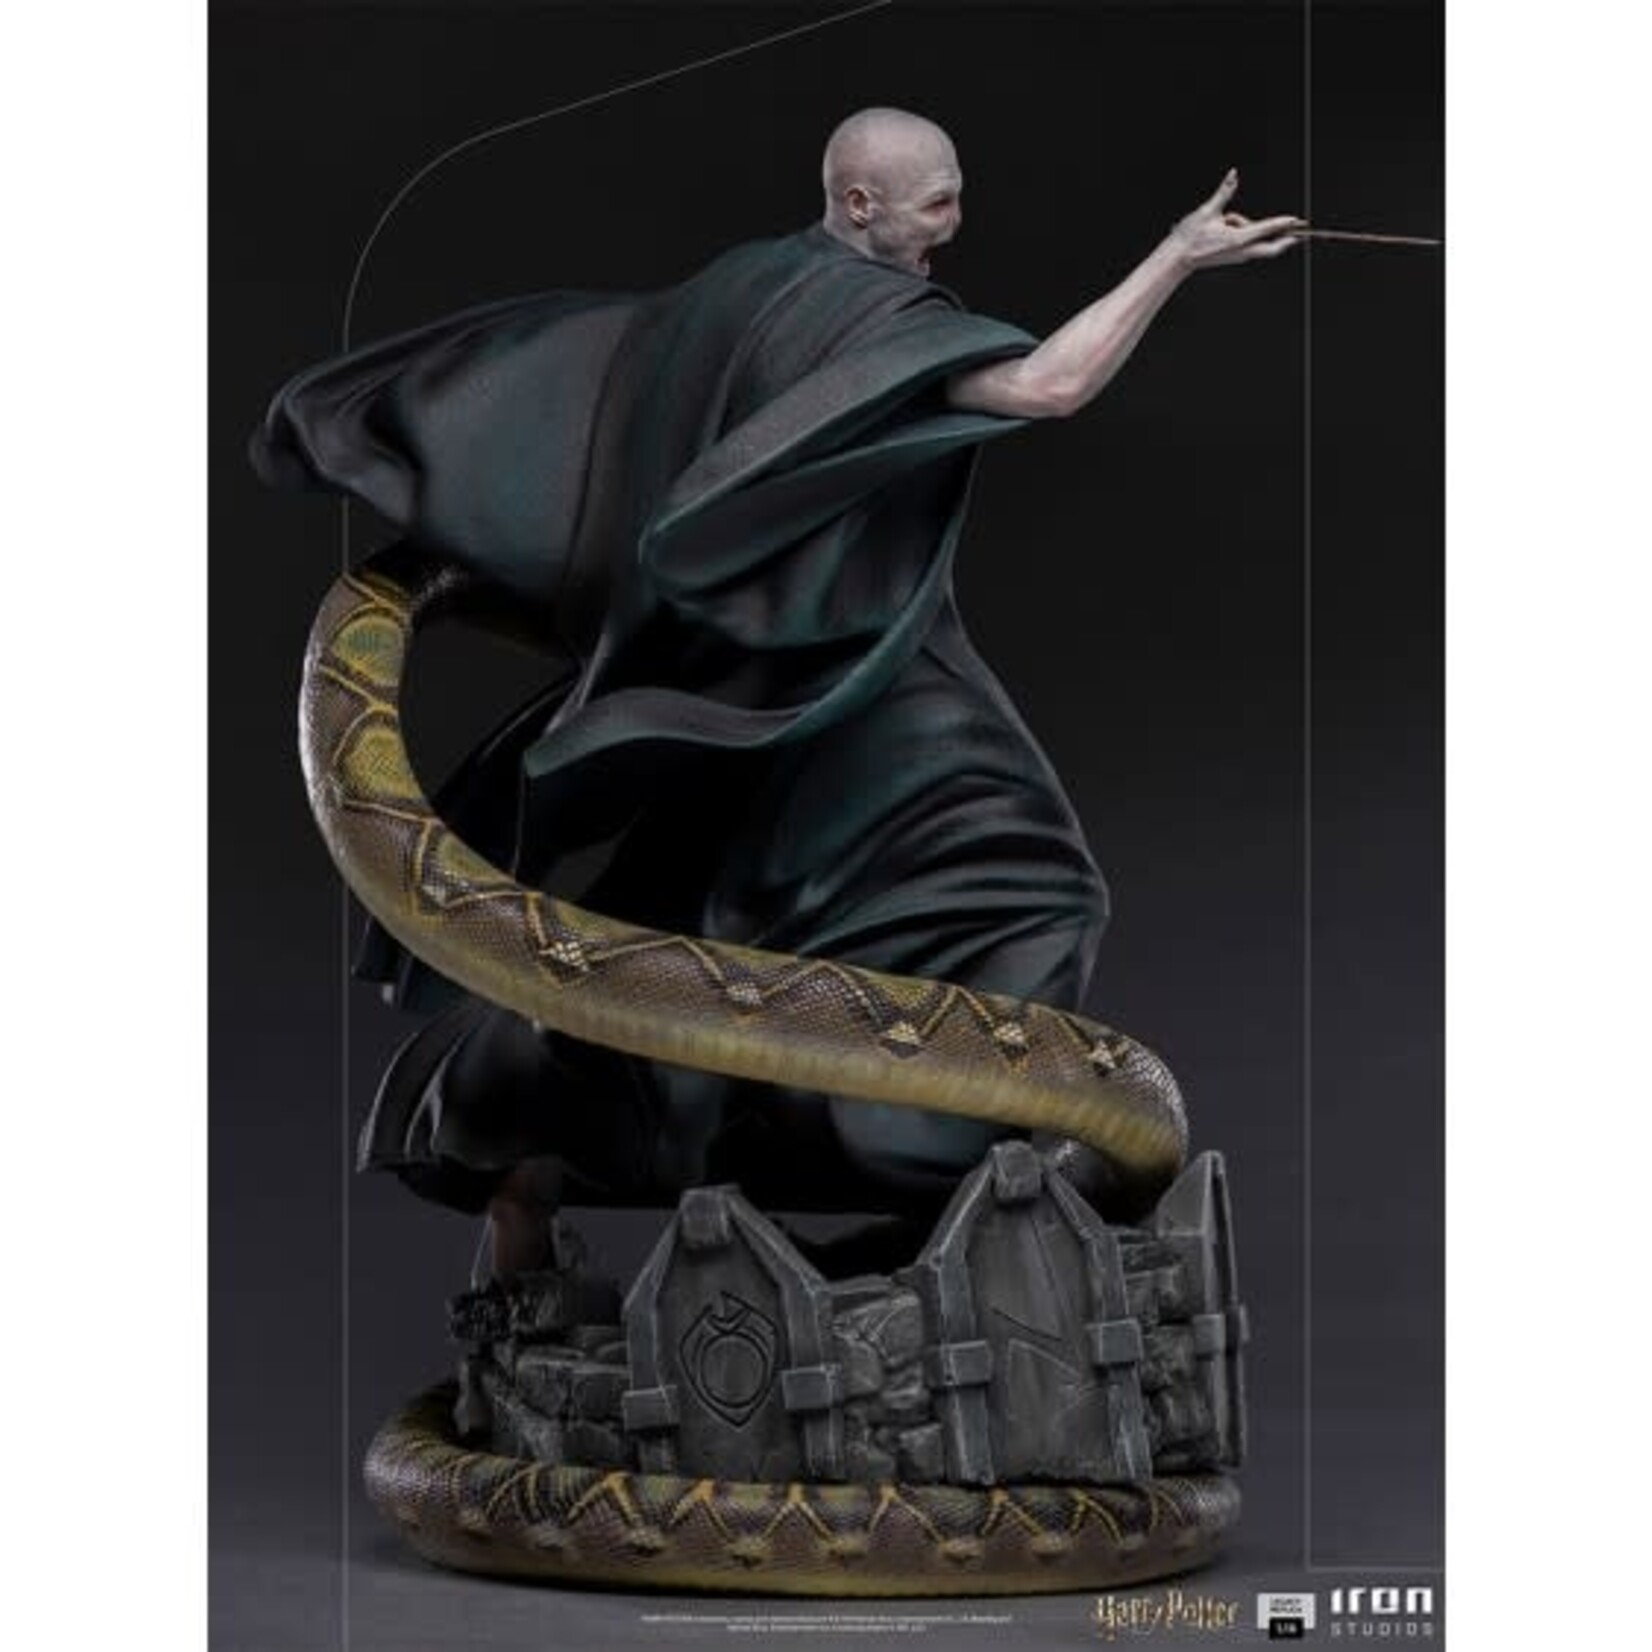 HARRY POTTER LORD VOLDEMORT STATUE IRON STUDIOS #401/500 CONSIGNMENT M.G